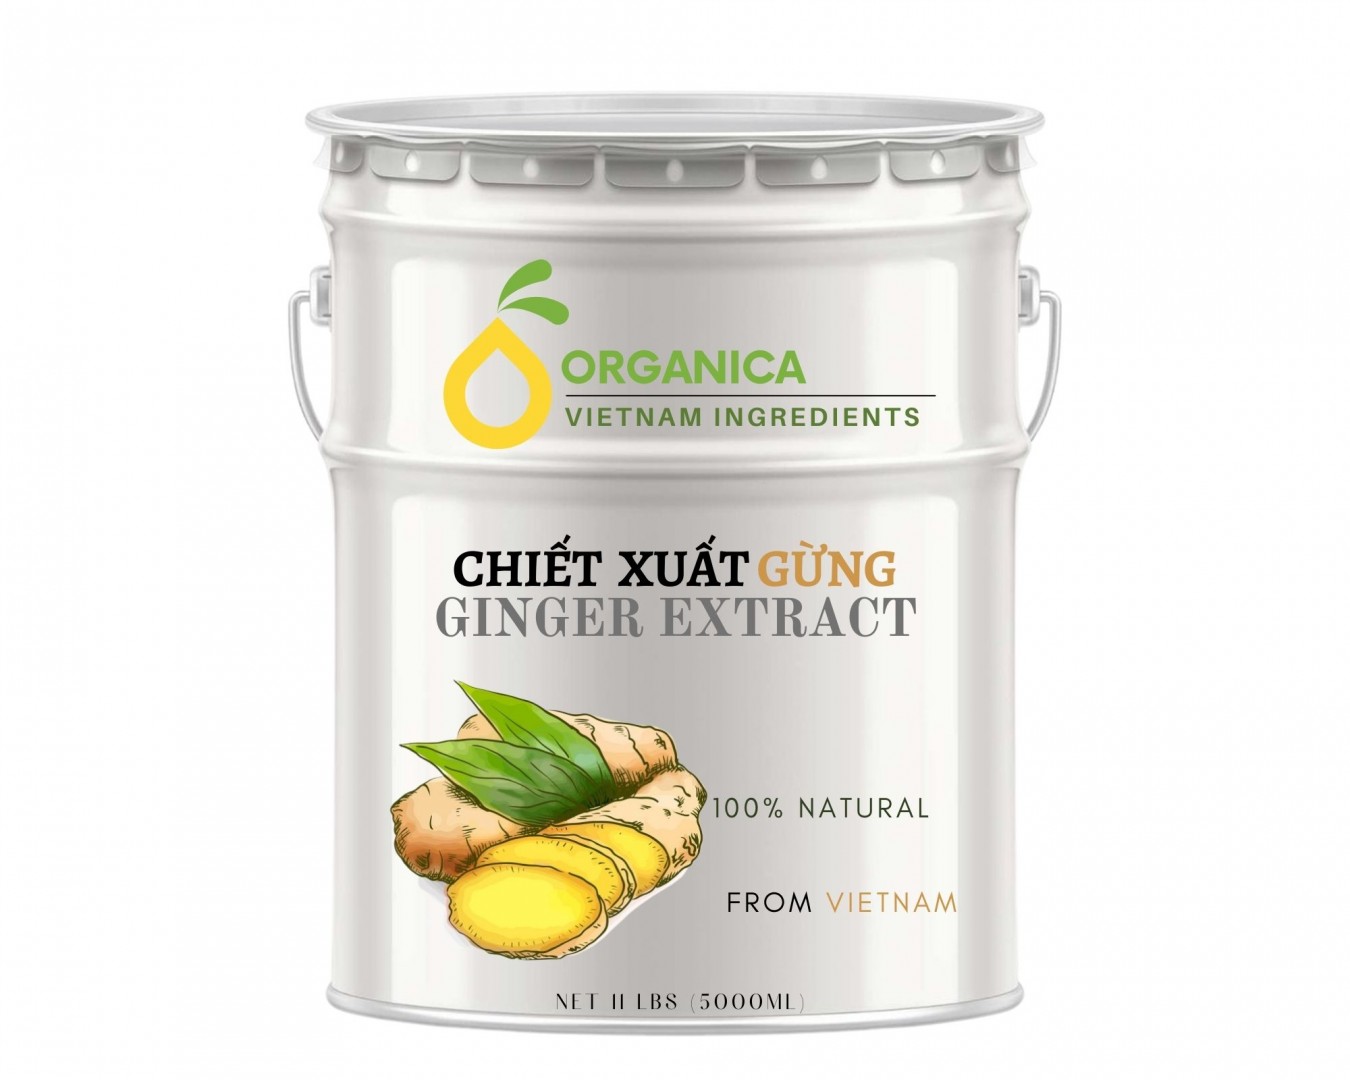 Chiết xuất gừng (Ginger extract)